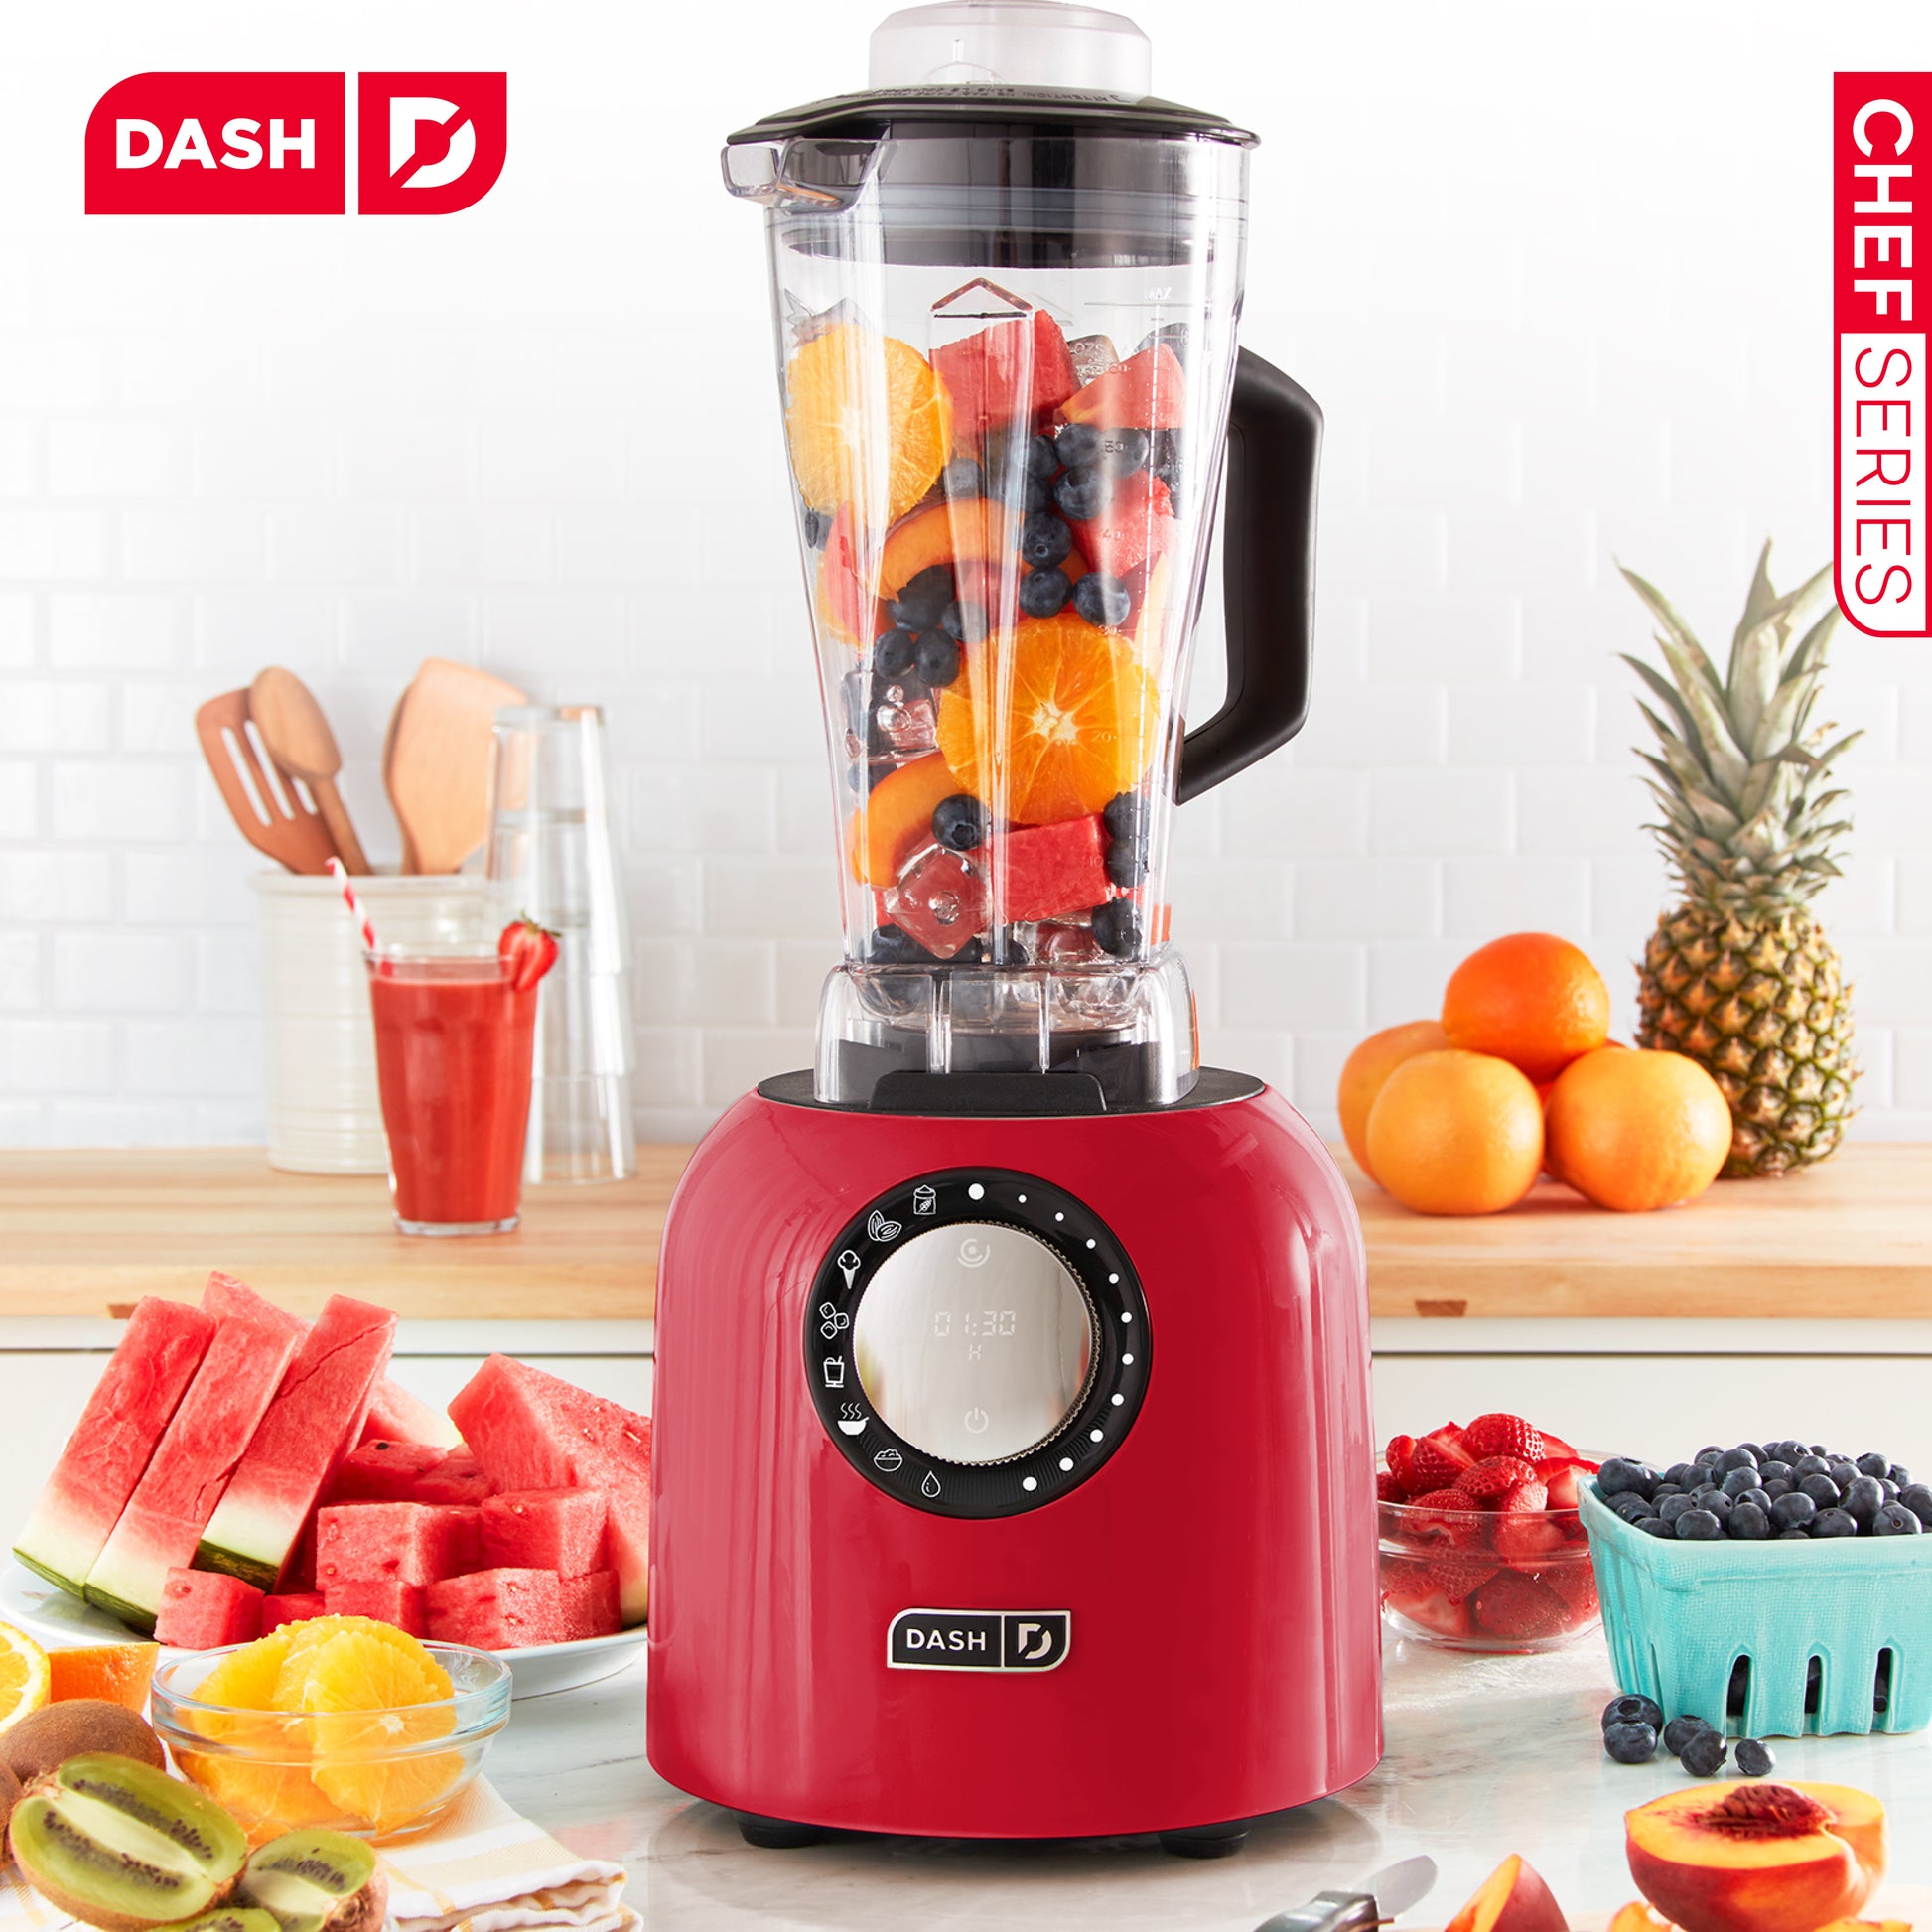 Dash Chef Series Blender - Review & Buying Guide